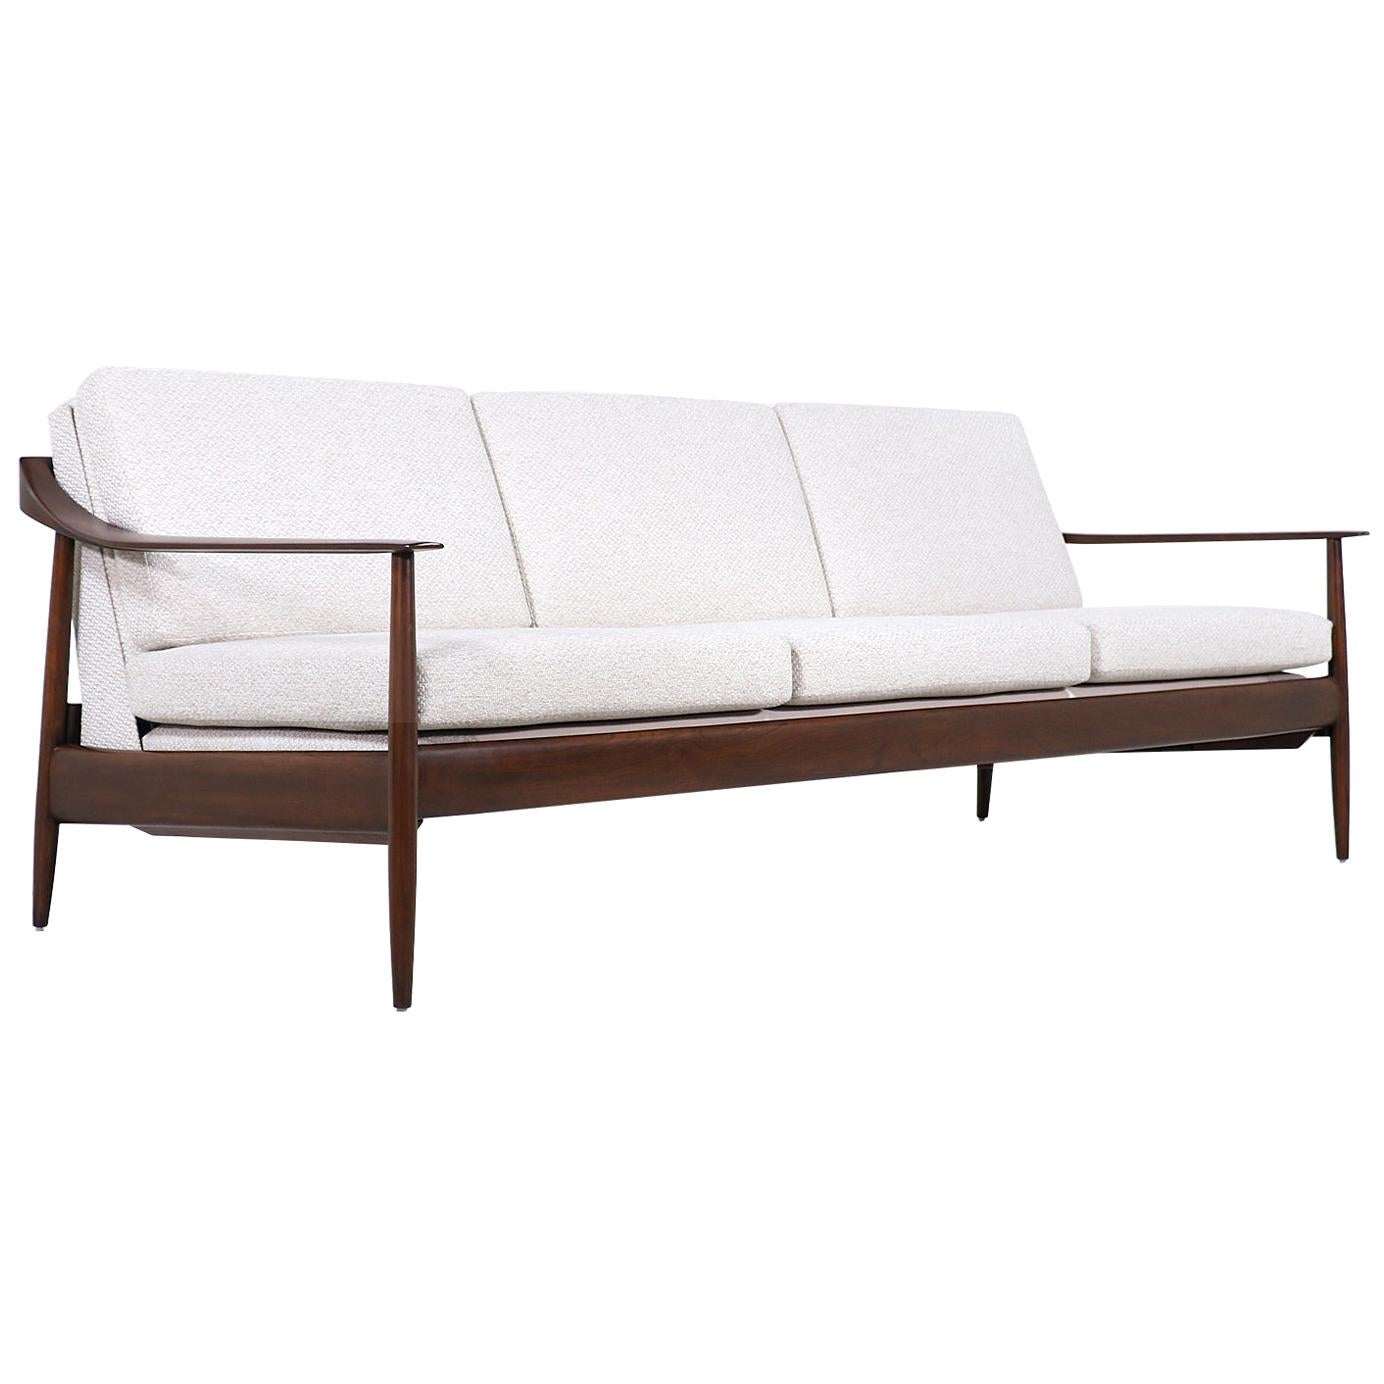 Wilhelm Knoll Convertible Sofa / Daybed for Antimott Knoll